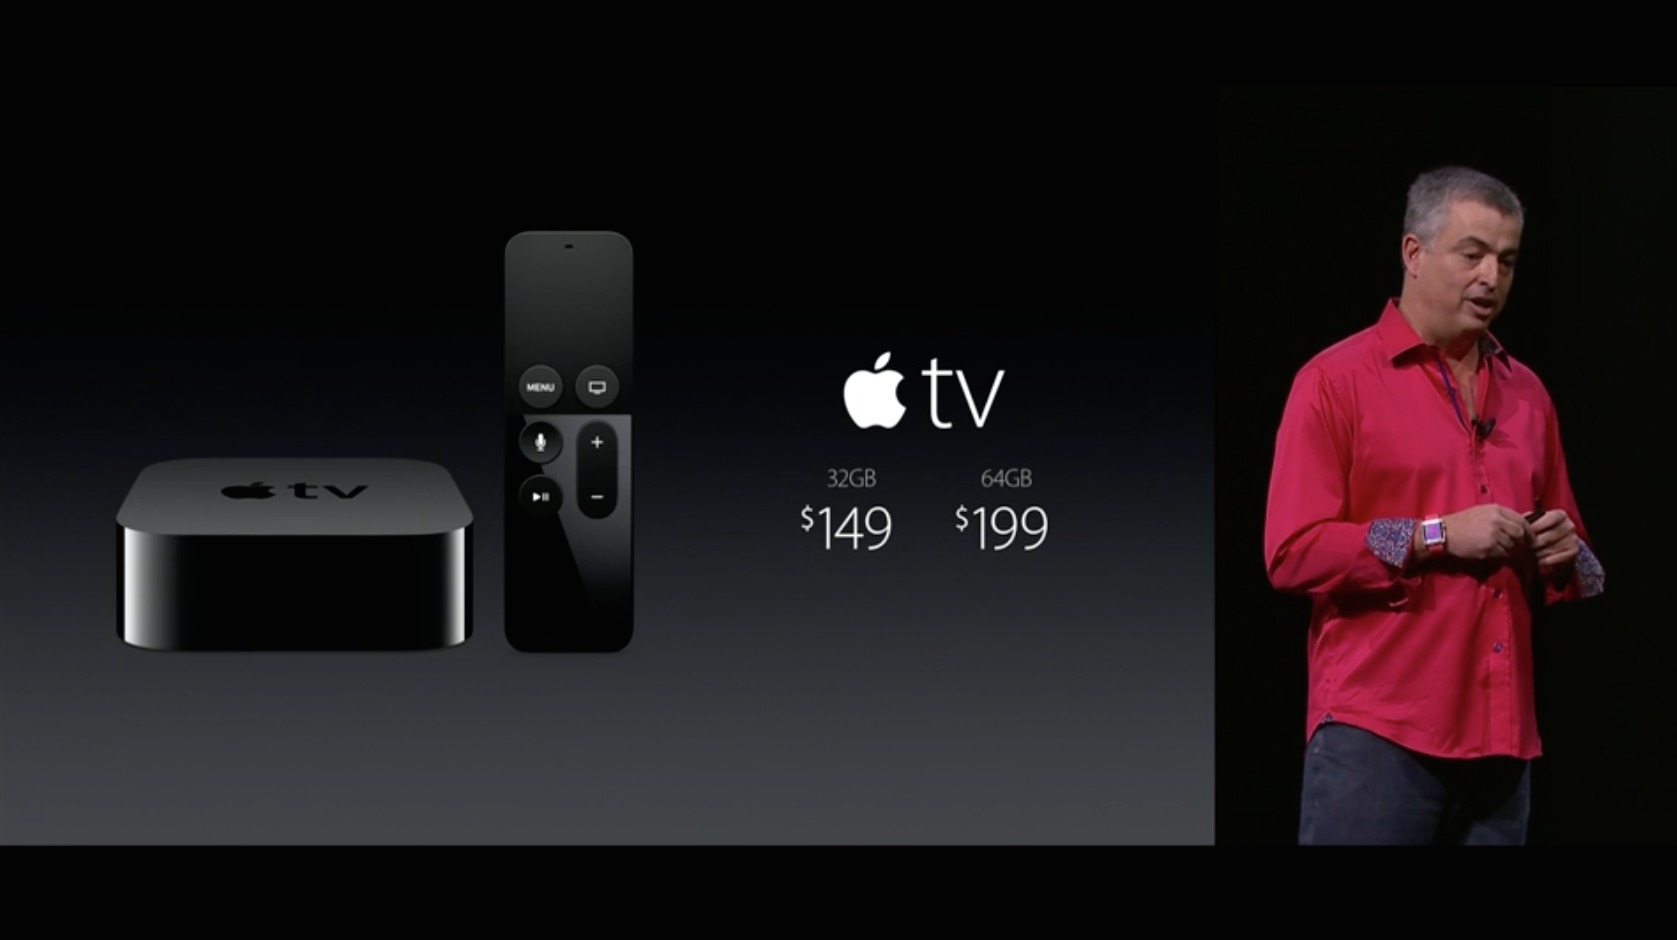 The Fourth-Generation Apple TV Is at Last TidBITS